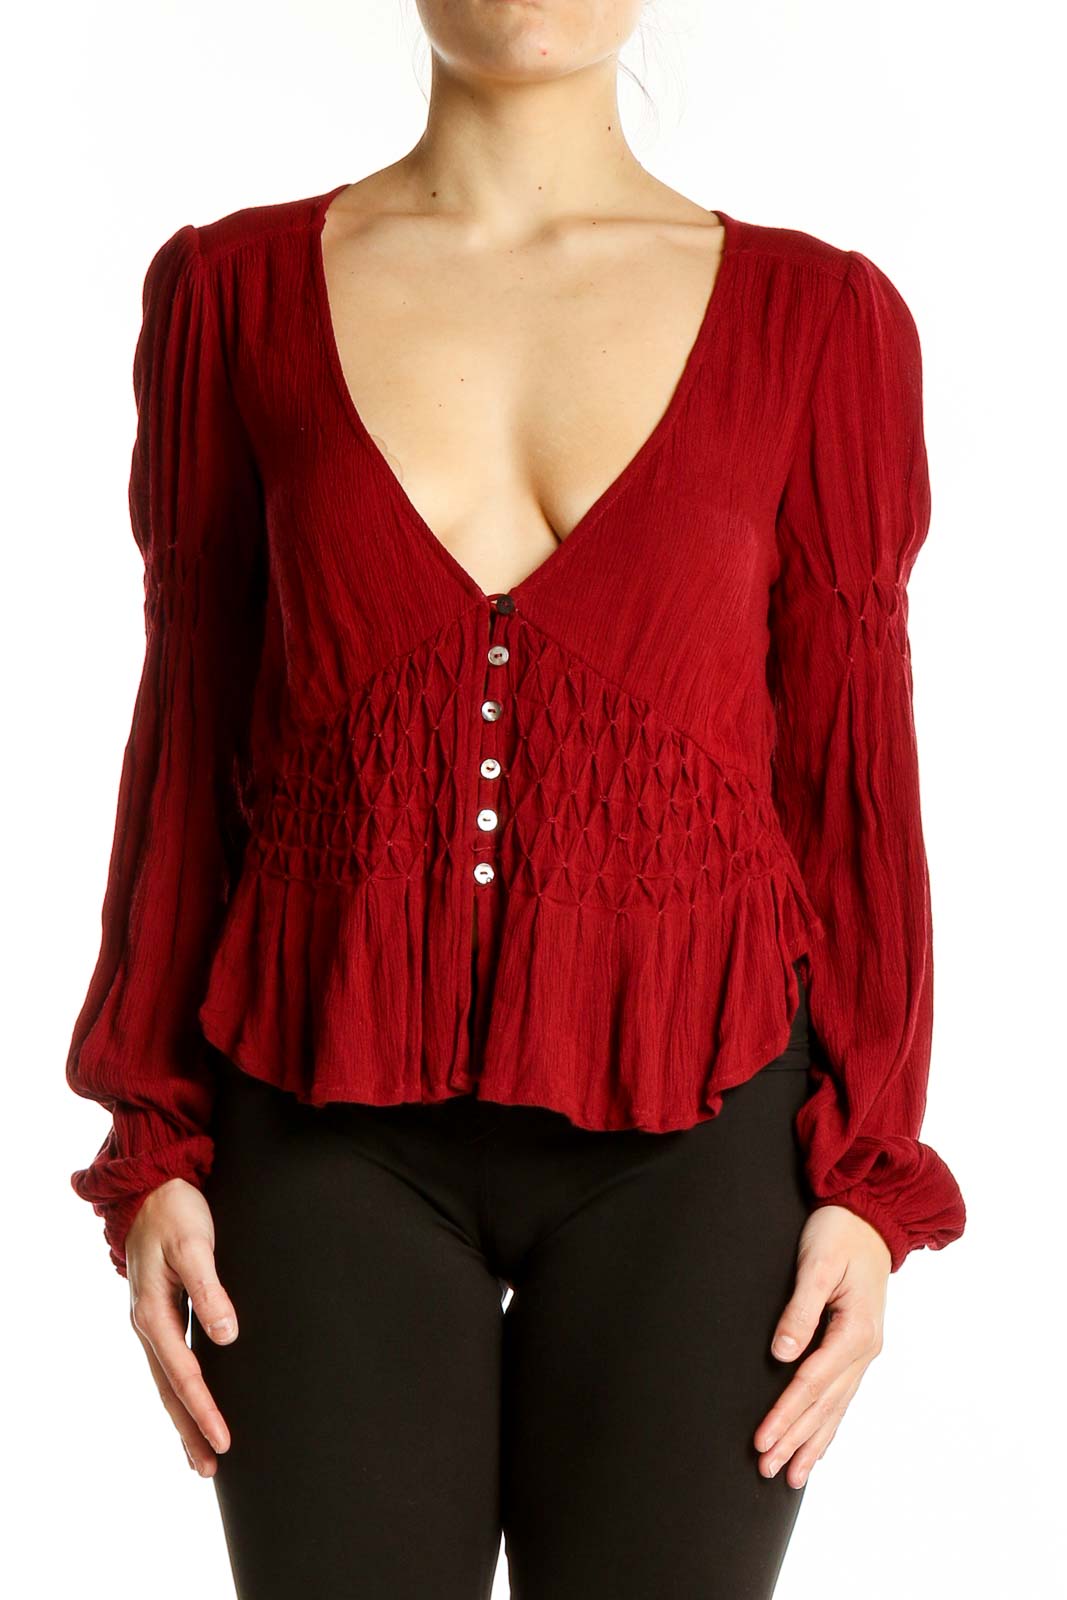 Red V Neck Retro Top Front